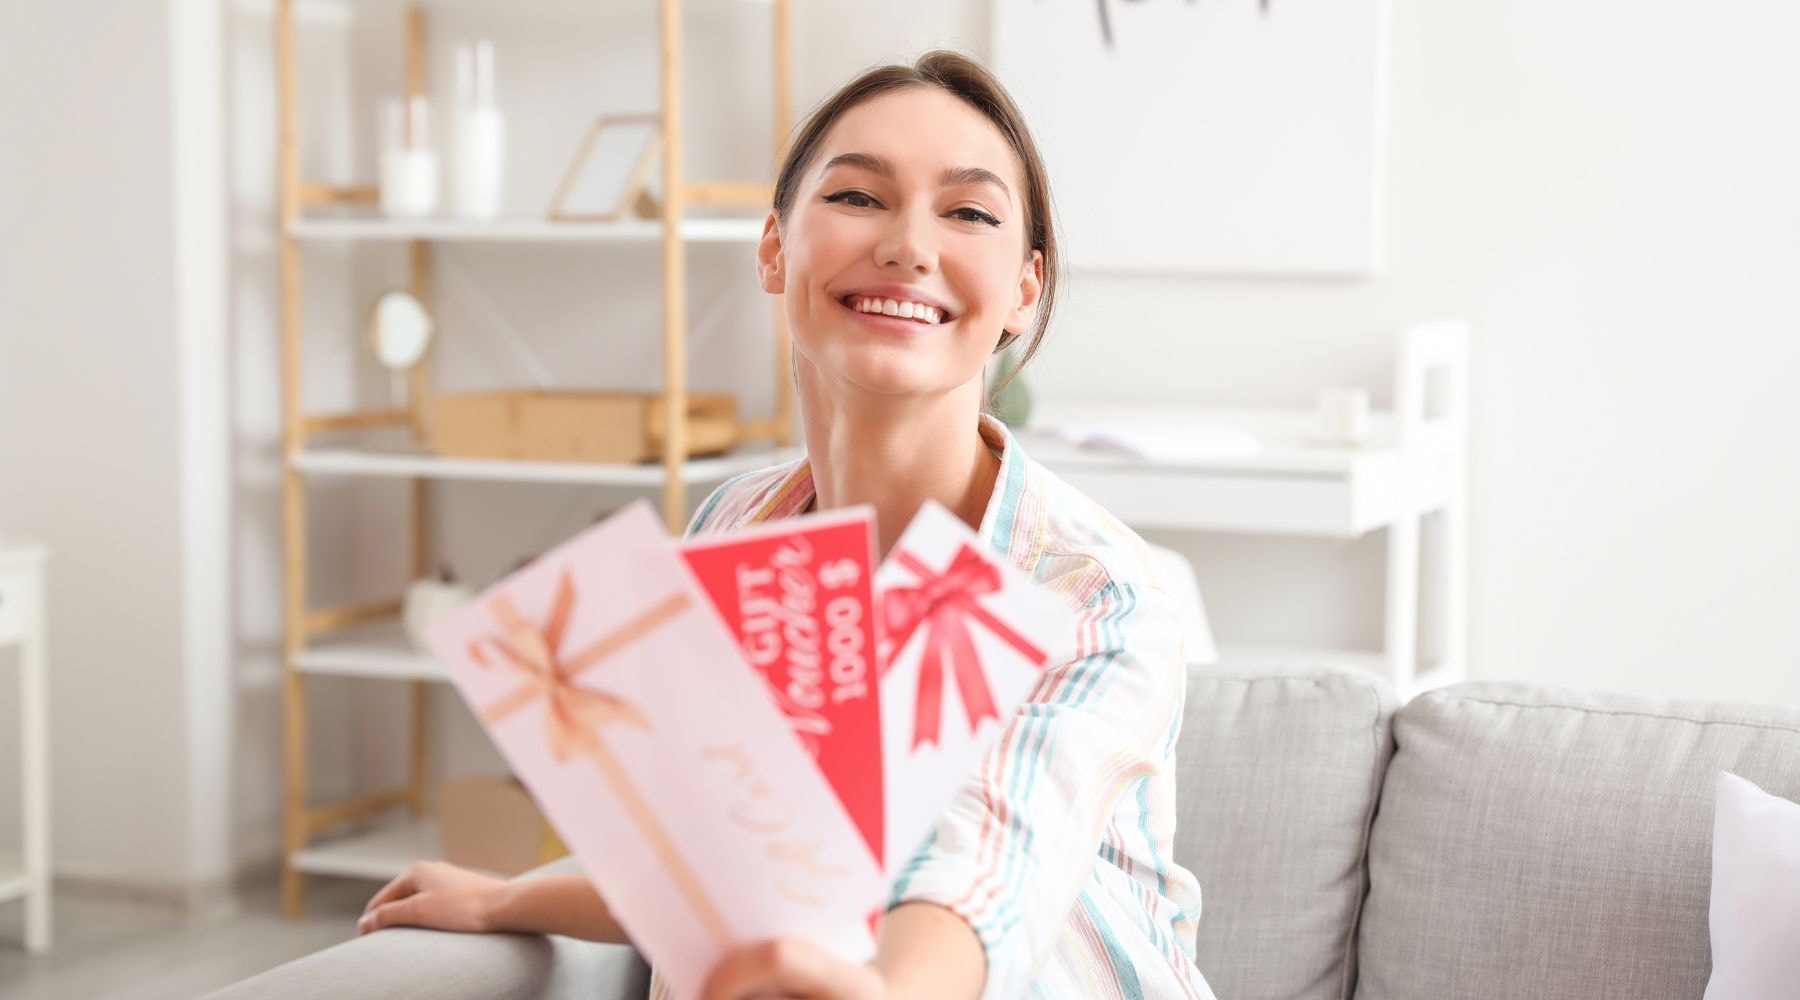 Smiling woman showing gift vouchers in a modern living room.